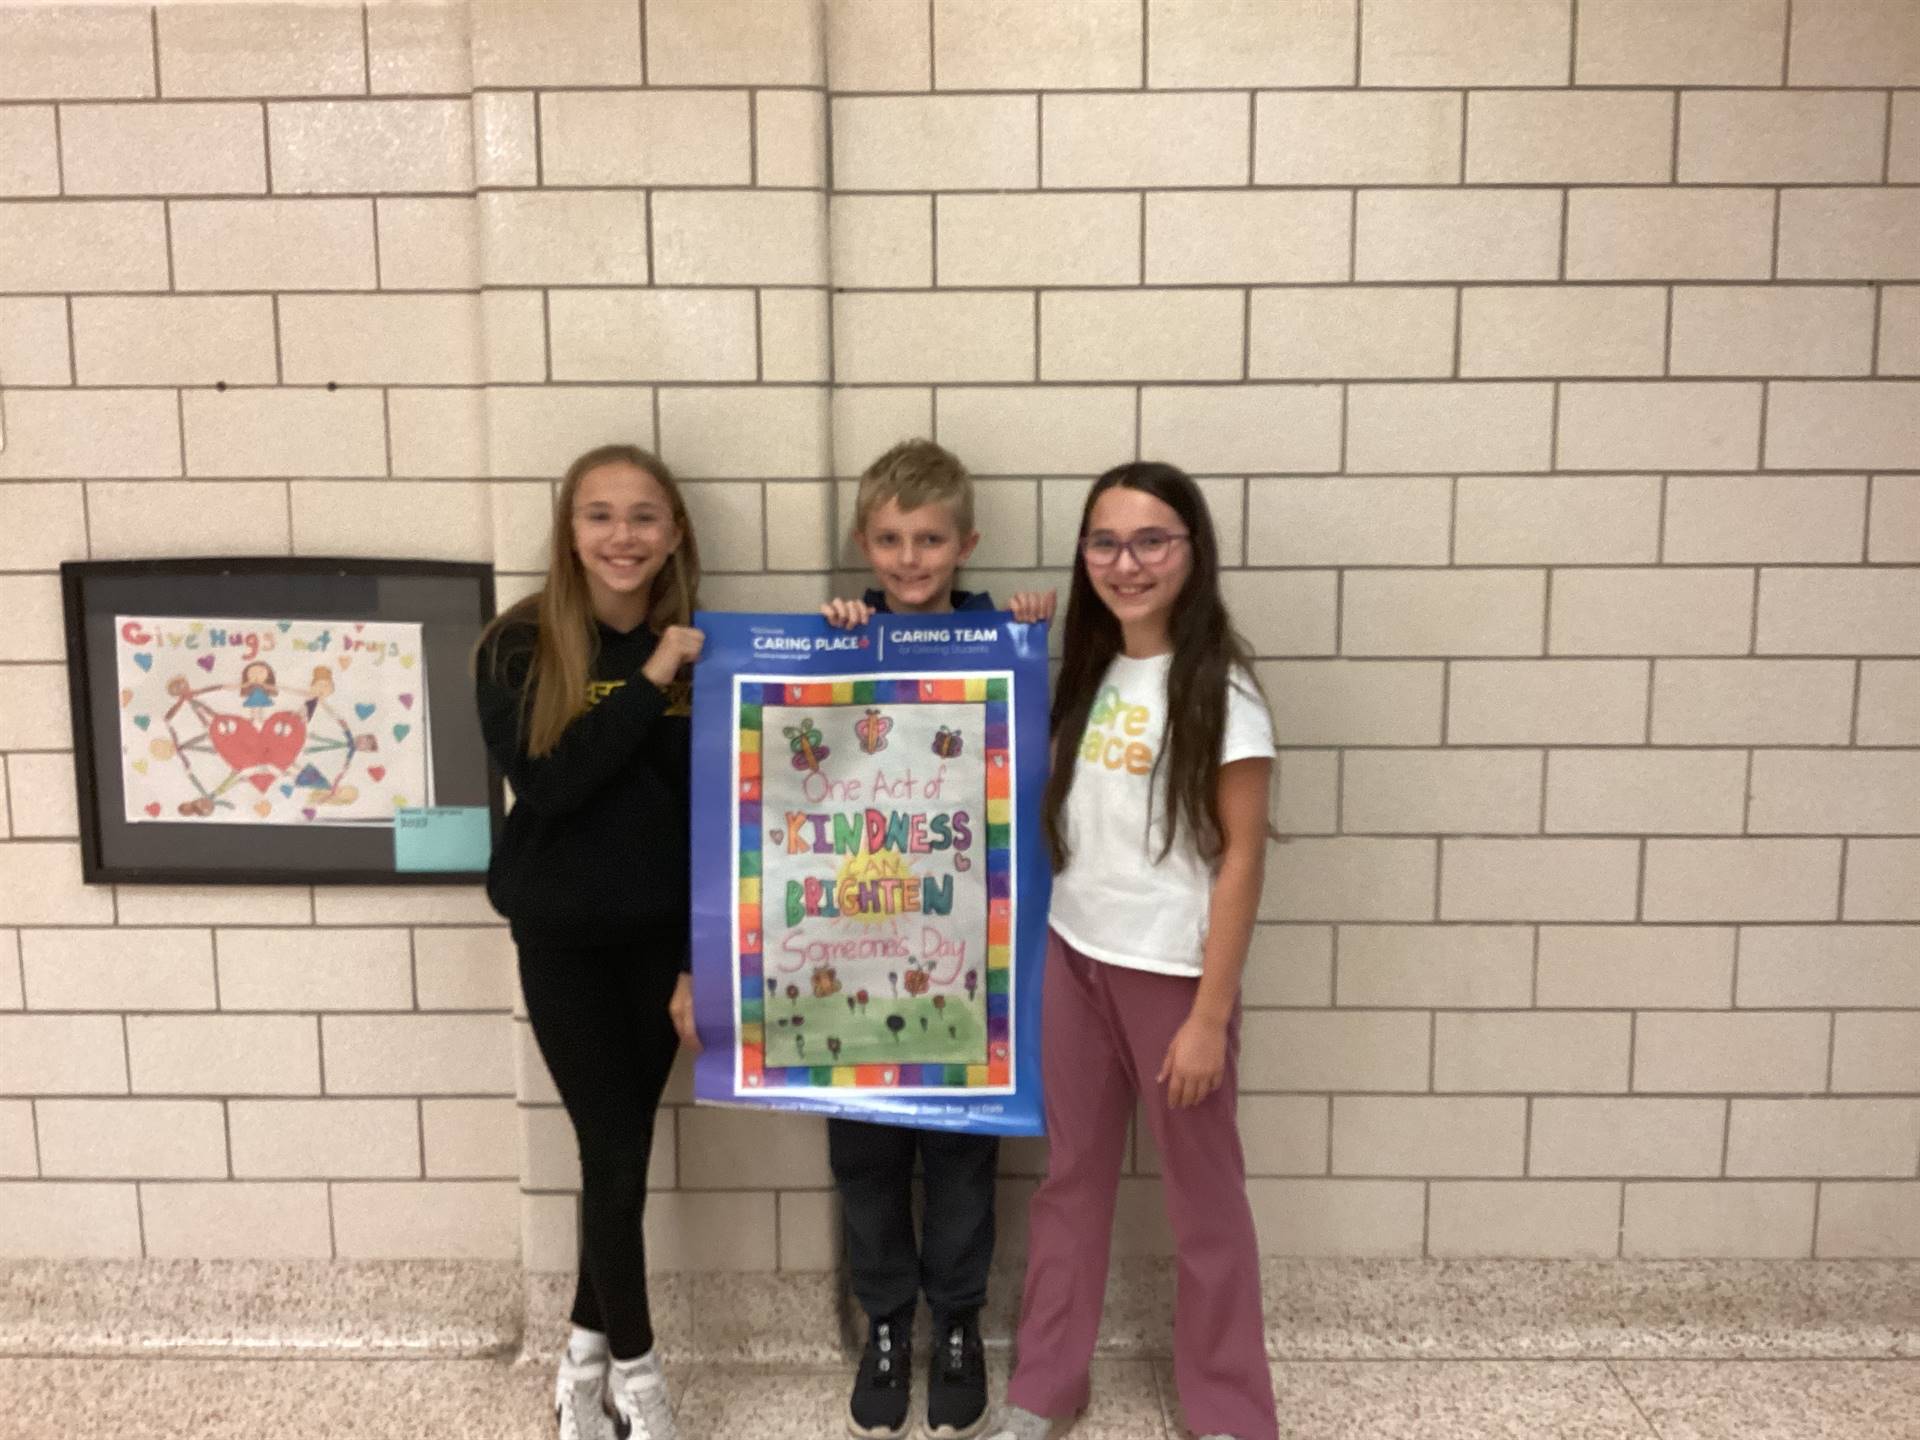 3 students who won Kindness Poster Contest